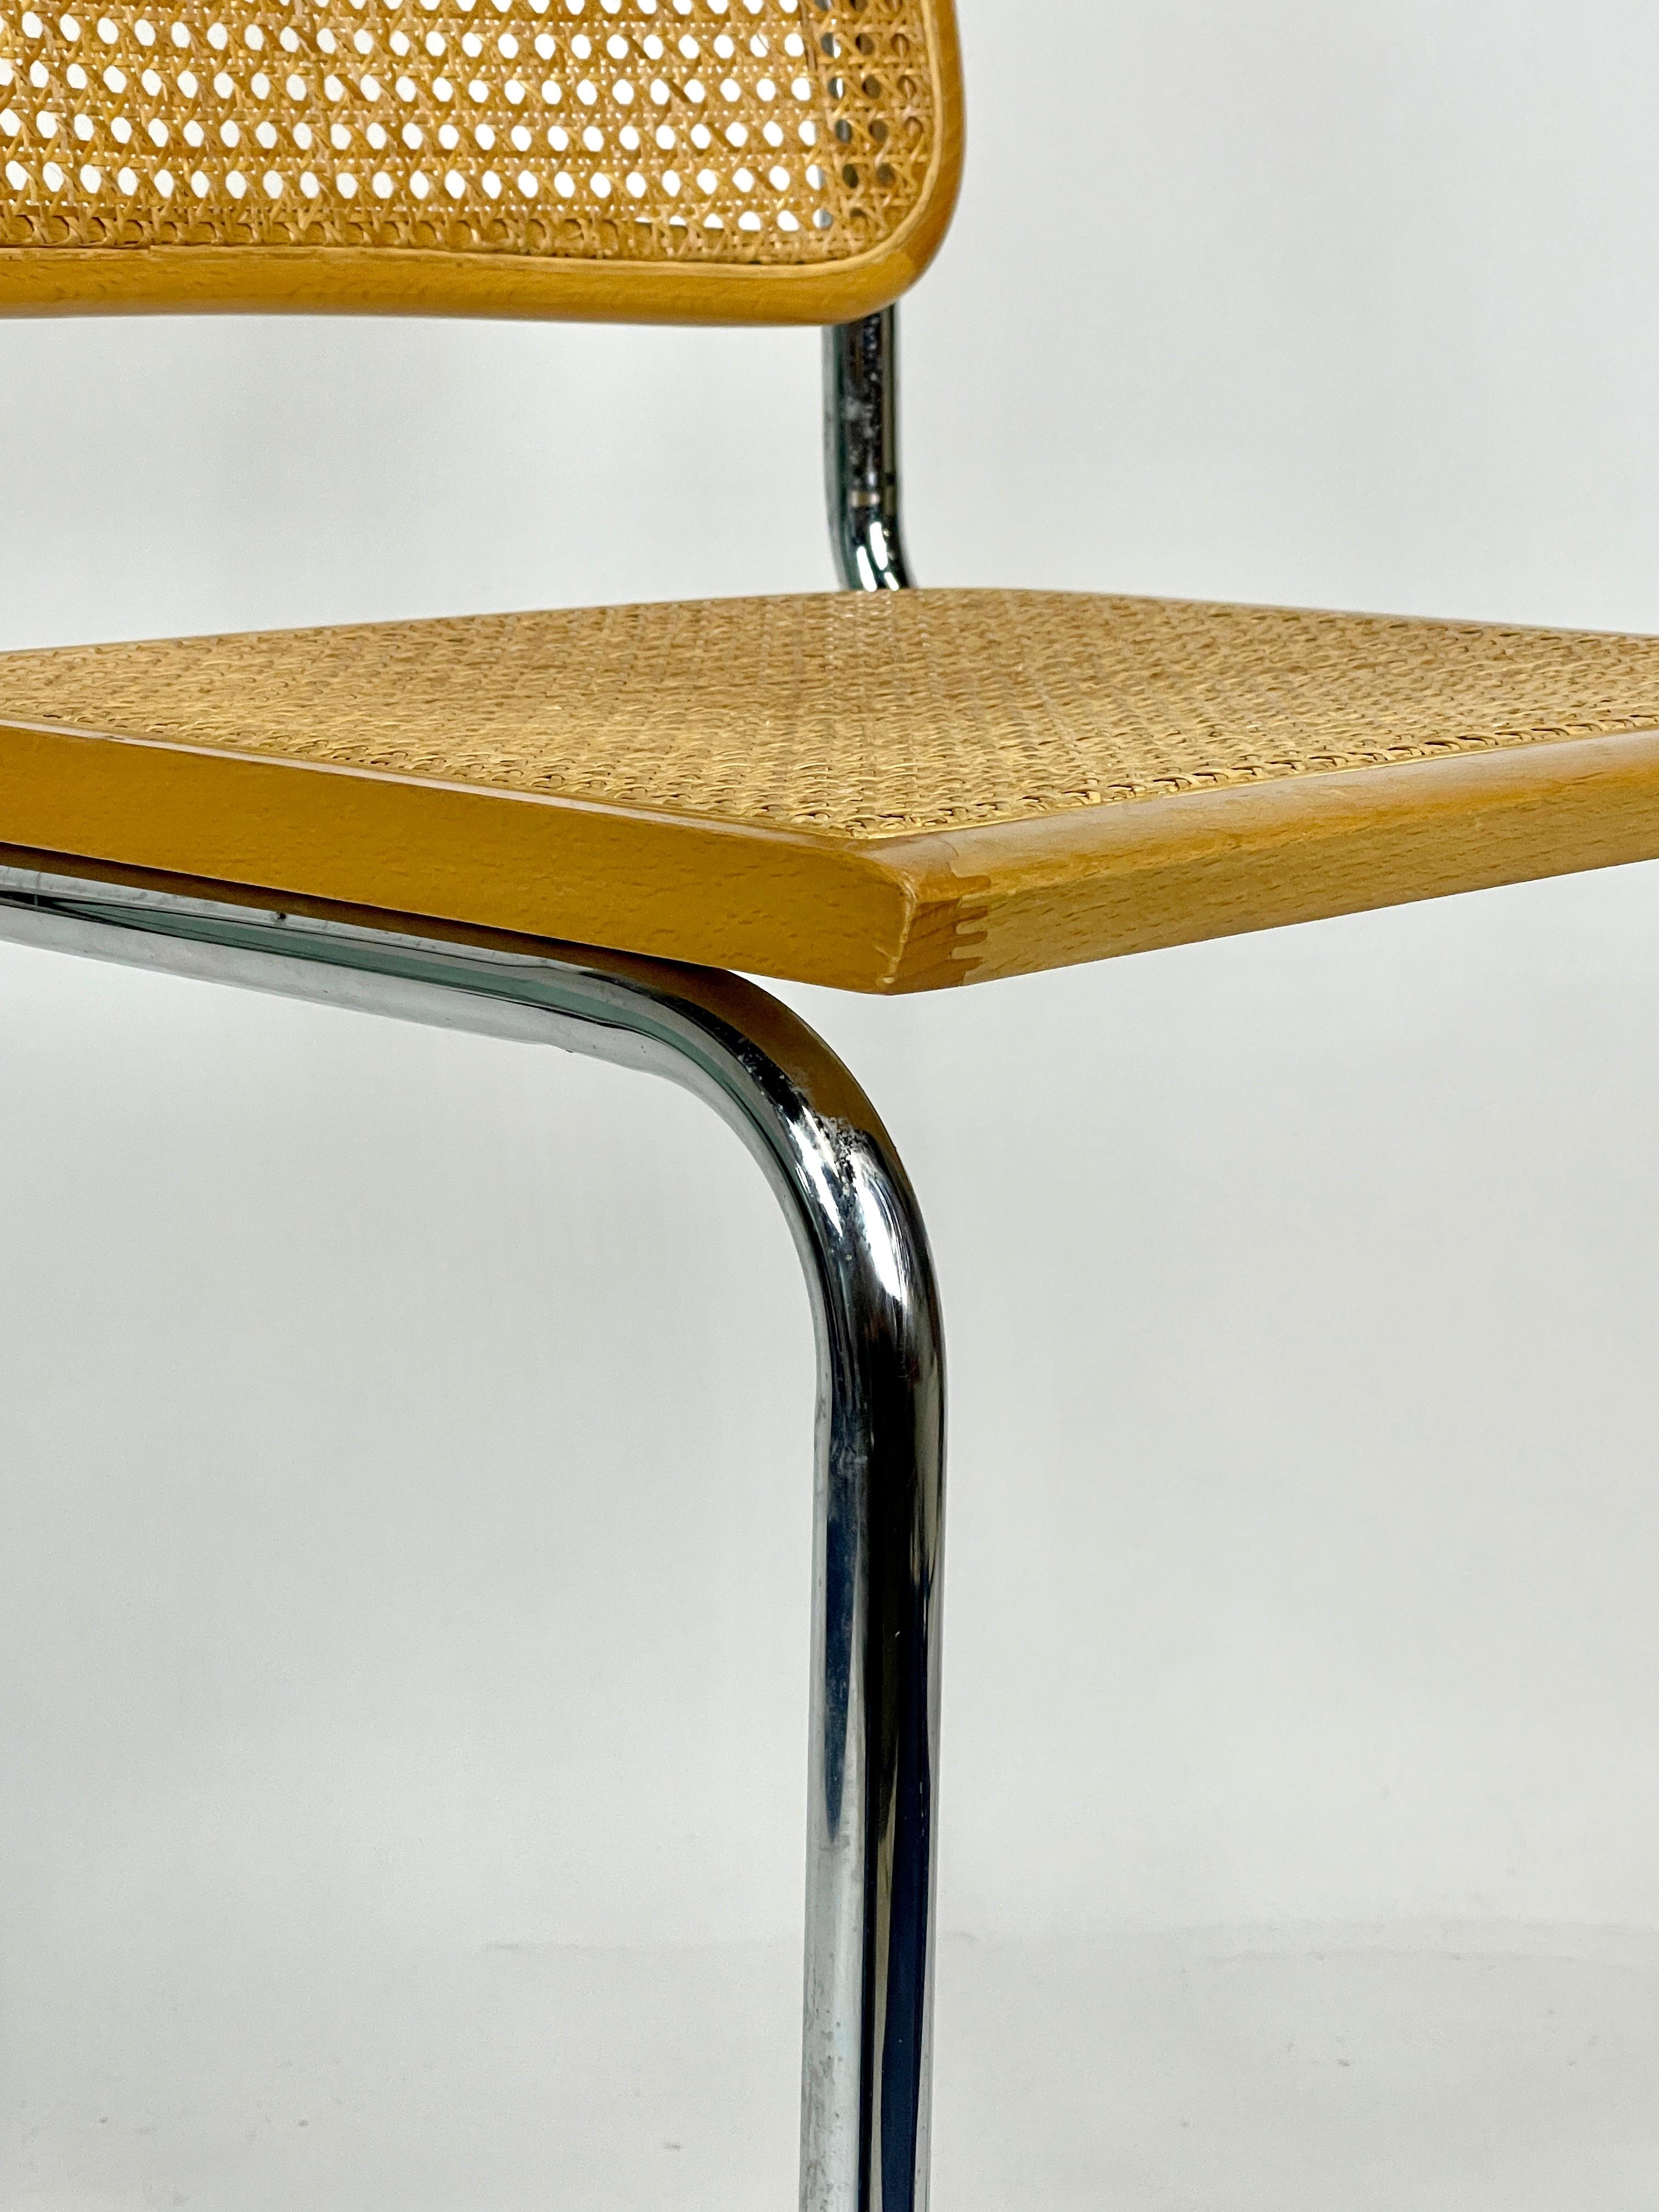 Woven Pair of Marcel Breuer Cane, Birch, and Chrome Cesca Stools Made in Italy